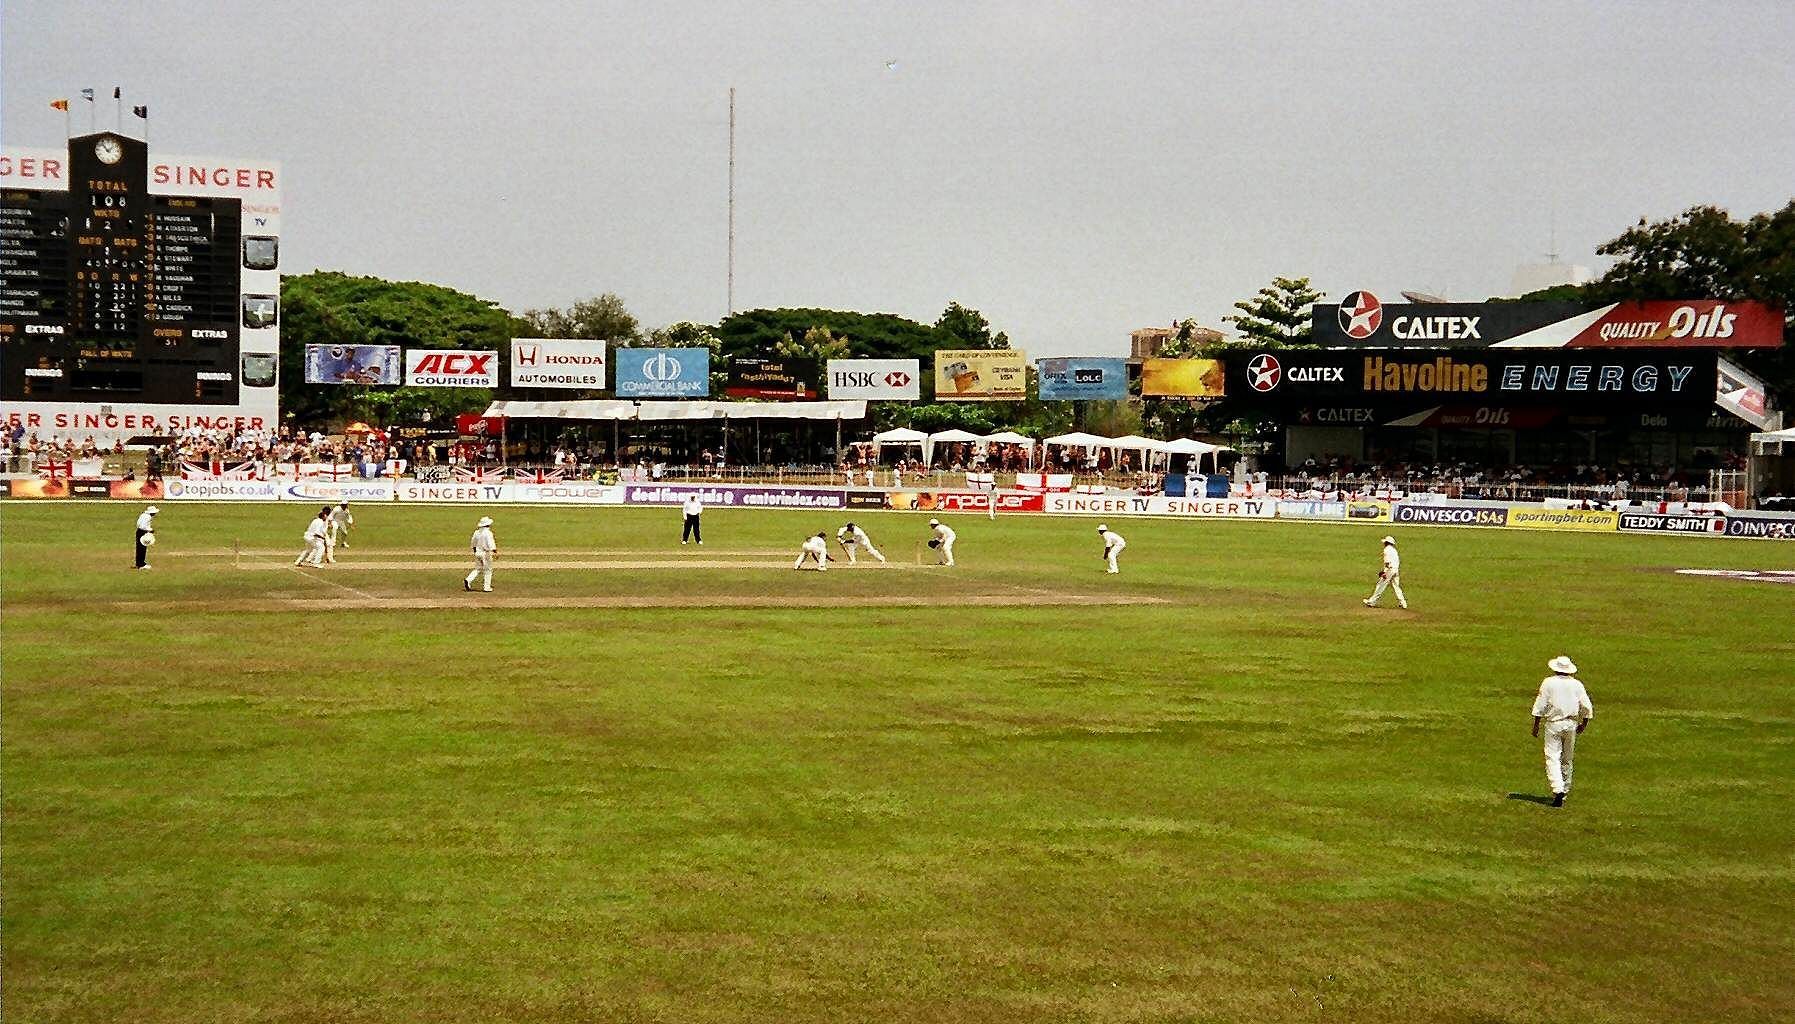 Sinhalese Sports Ground in Colombo (Source: Wikipedia)